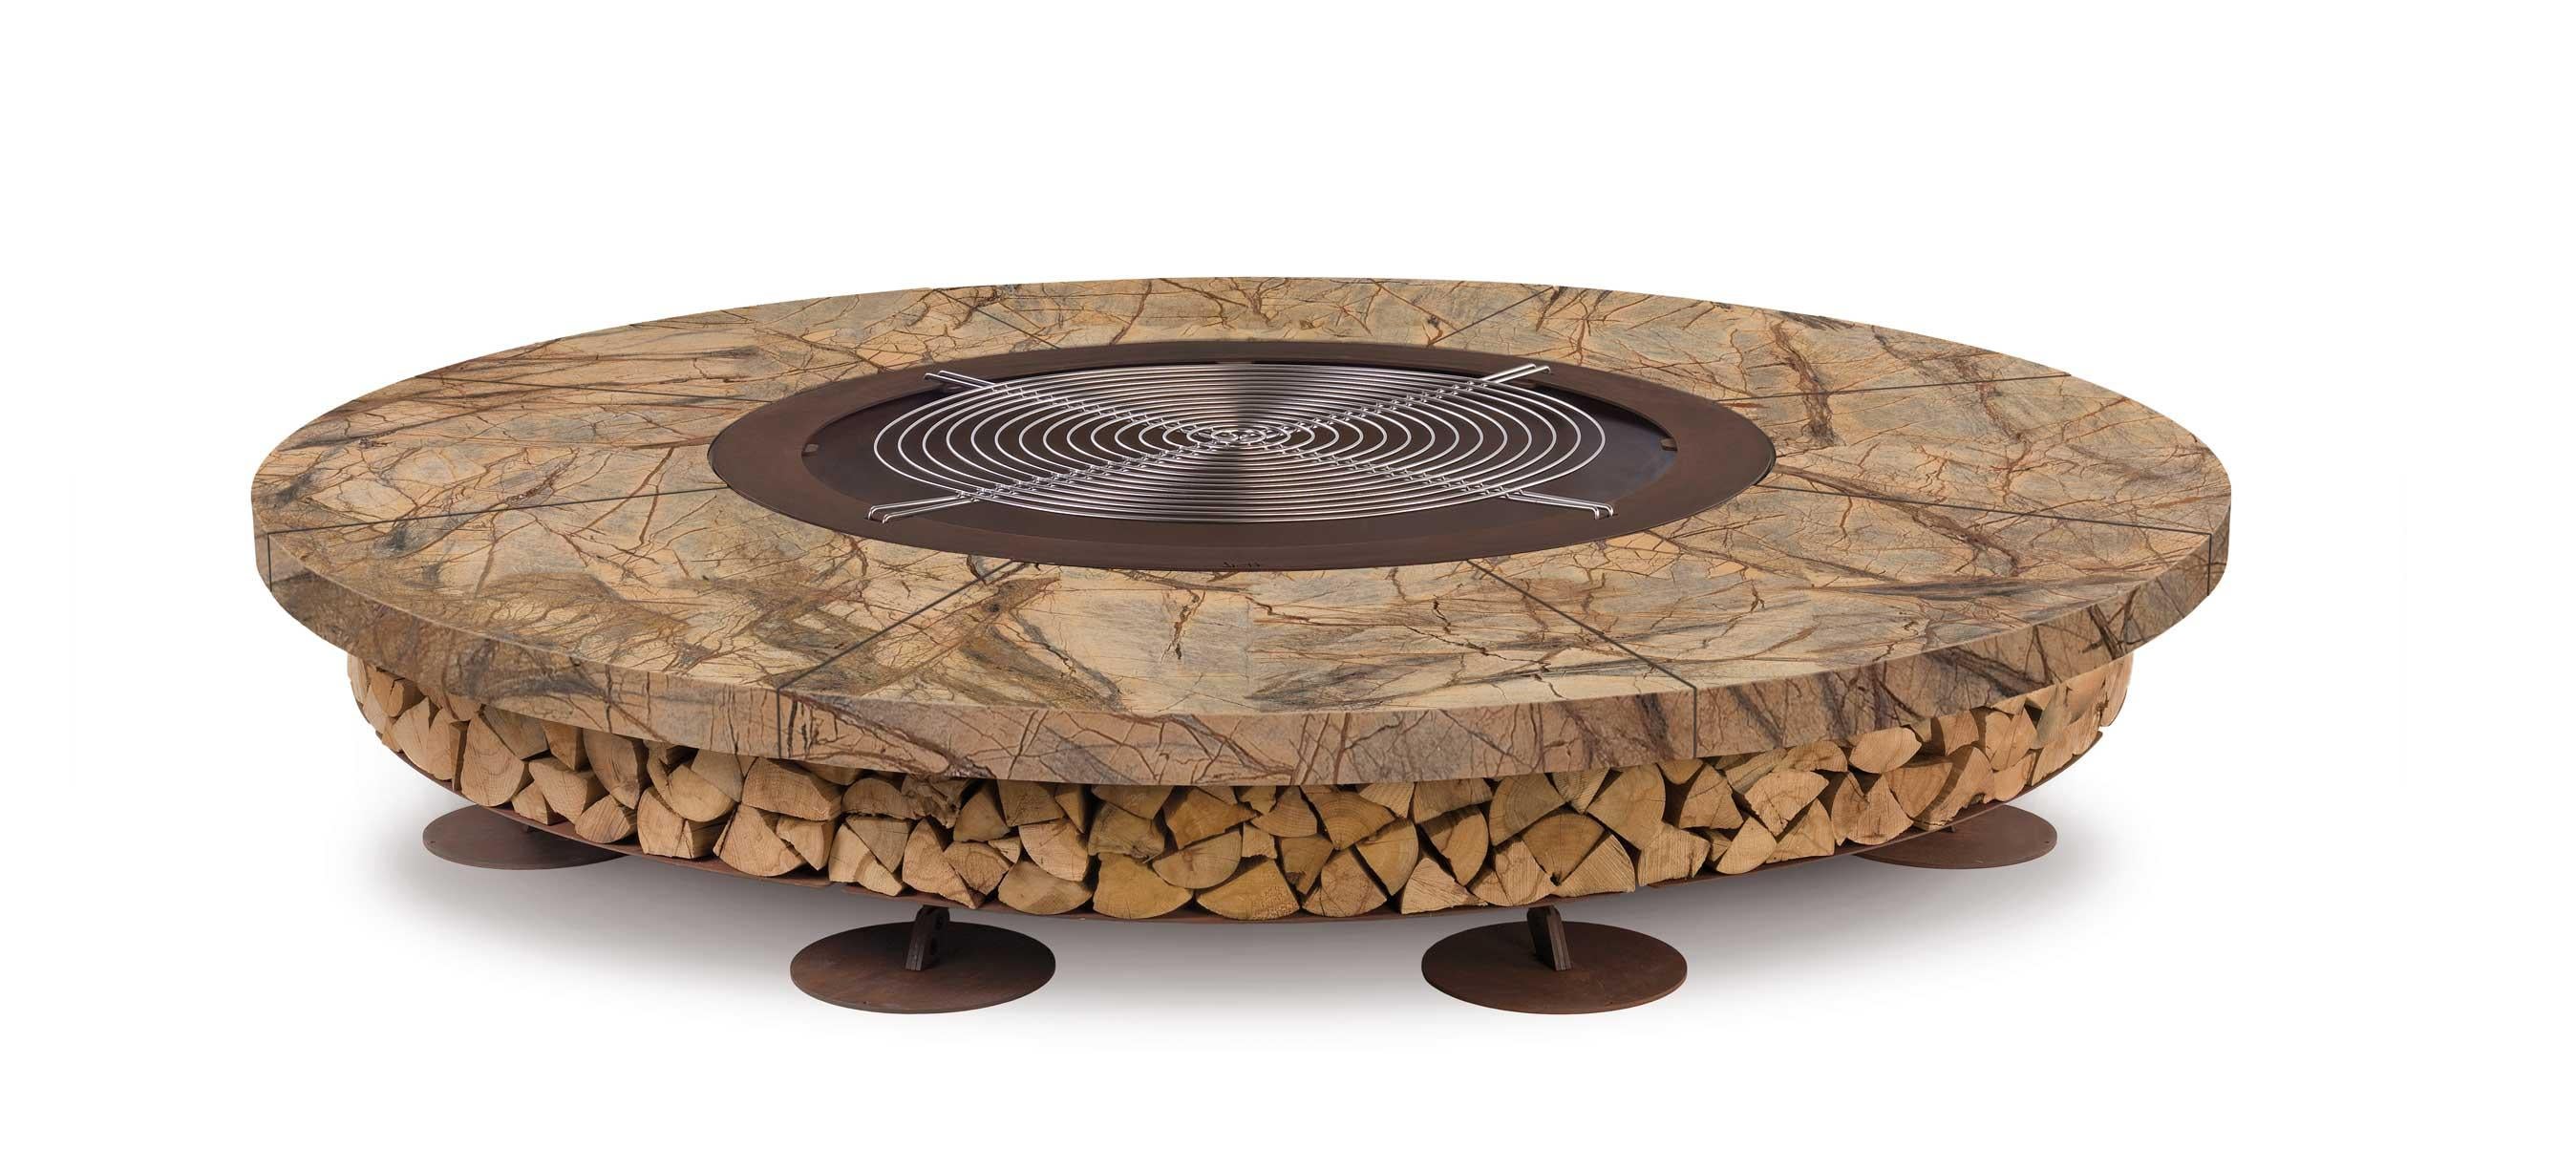 Ercole large Rain Forest brown marble fire pit by AK47 Design

Rain Forest brown marble fire pit Ø2500 mm.
Ercole is a outdoor wood-burning fire pit.
It is born by the union of two raw materials – the steel as a structural element and the marble